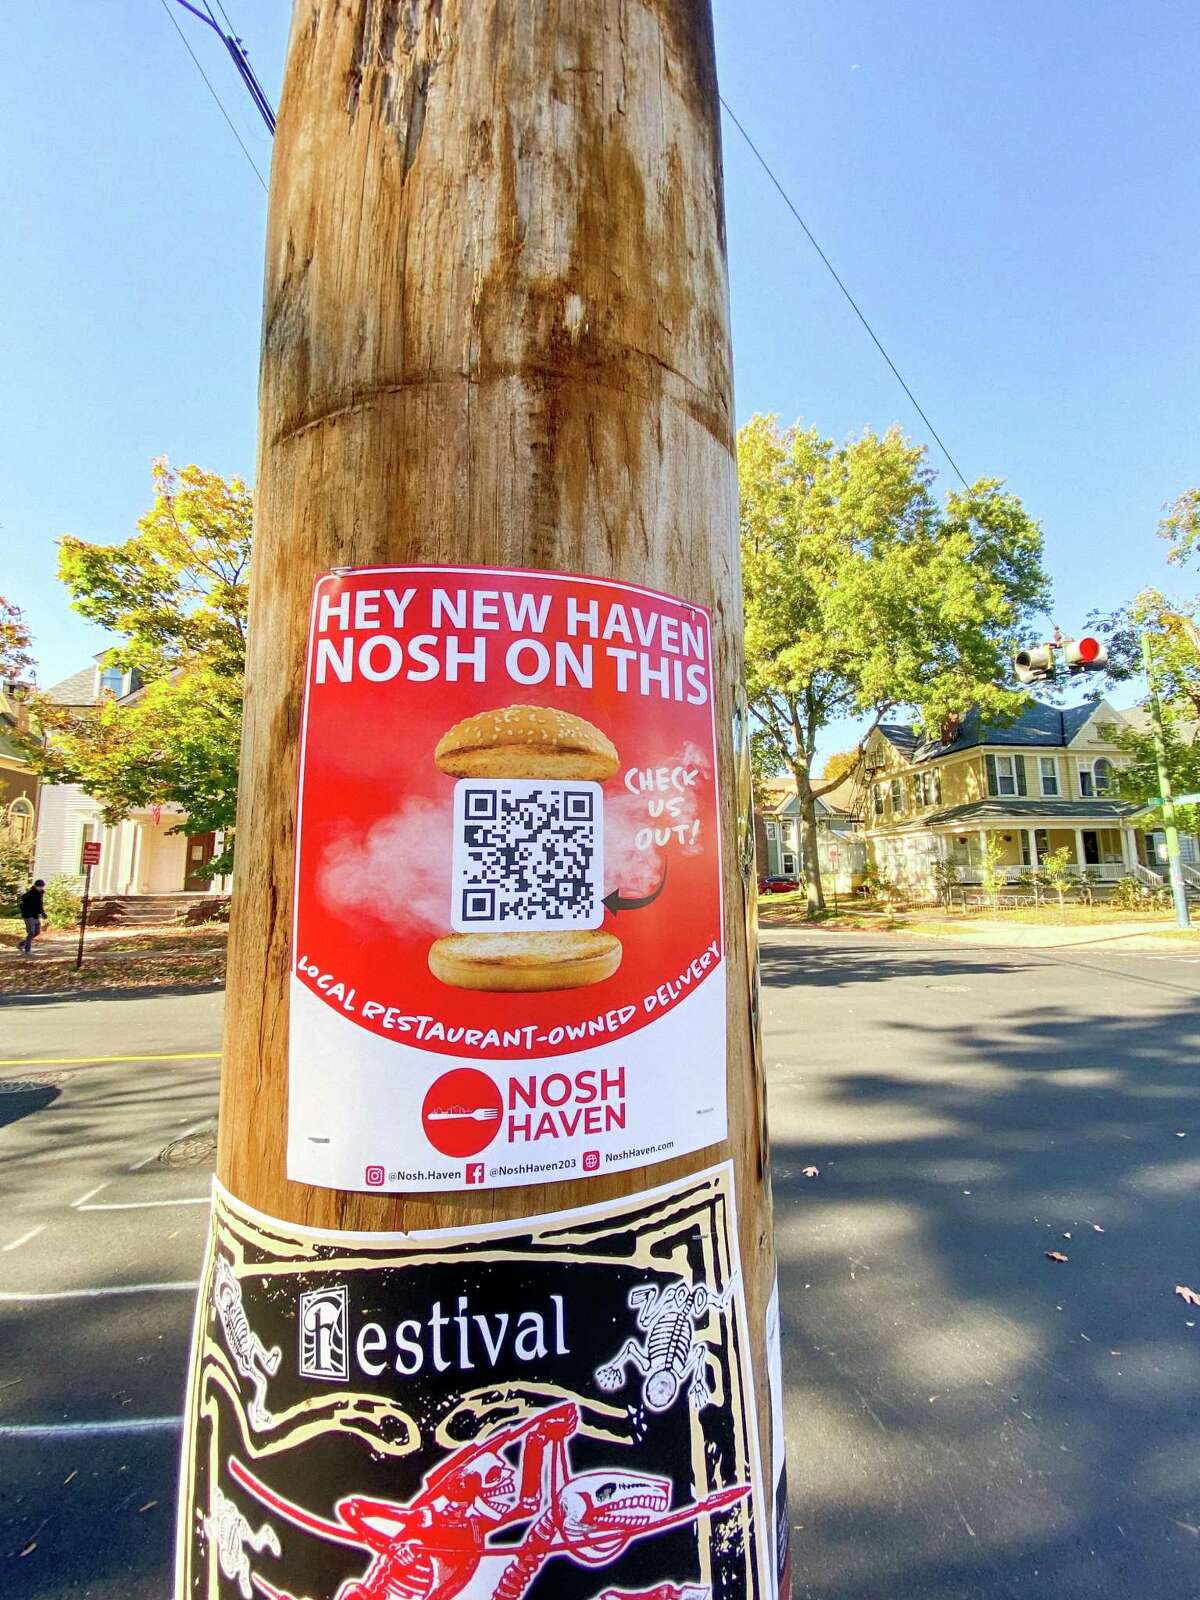 A Nosh Haven post on a utility pole on the corner of Orange and Canner streets in New Haven’s East Rock section.